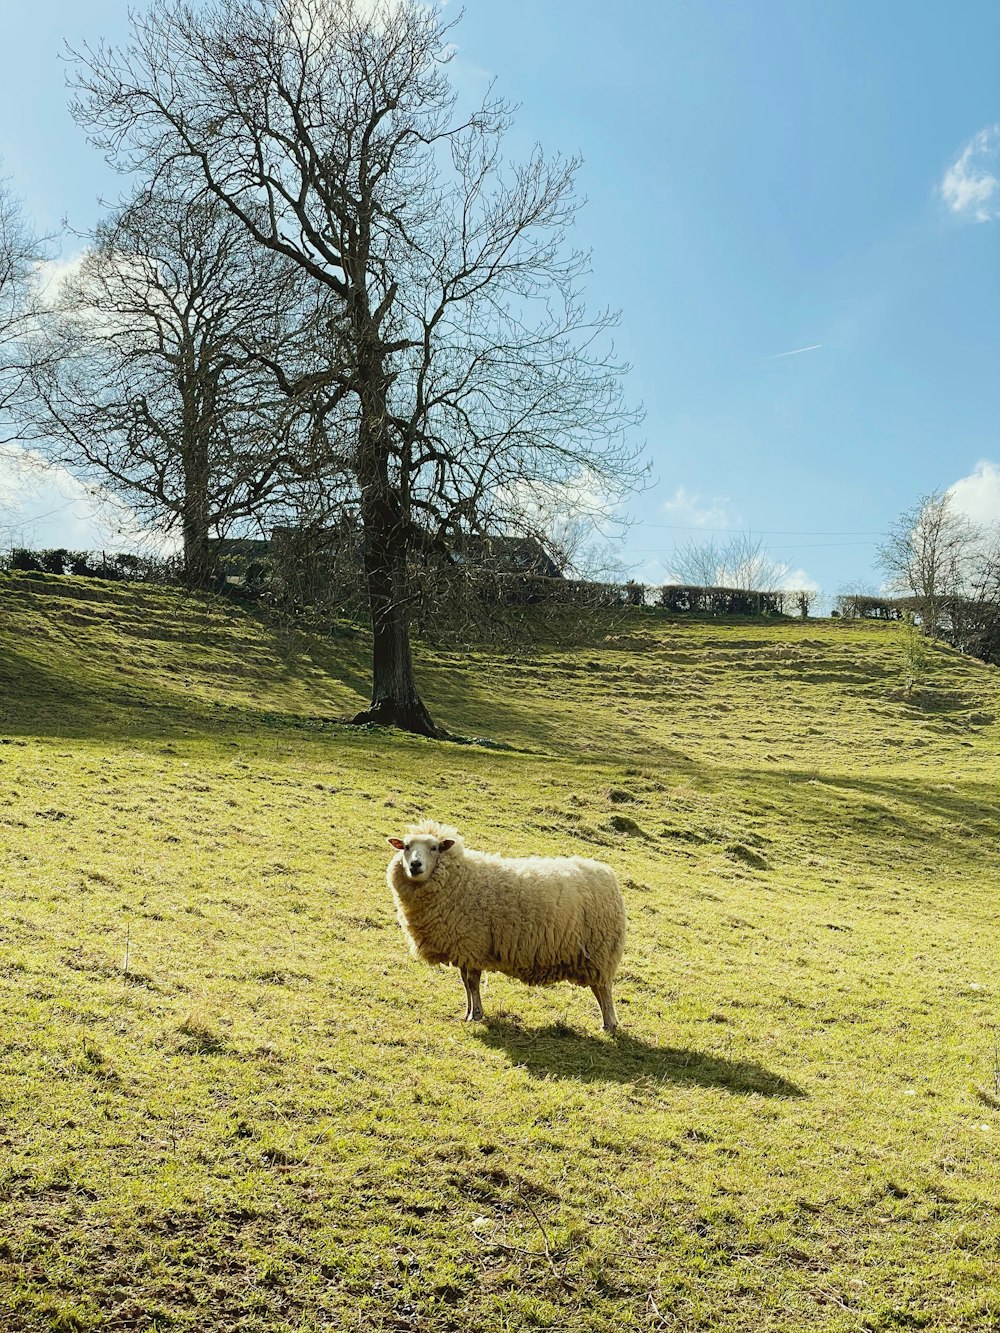 a sheep standing in a grassy field next to a tree